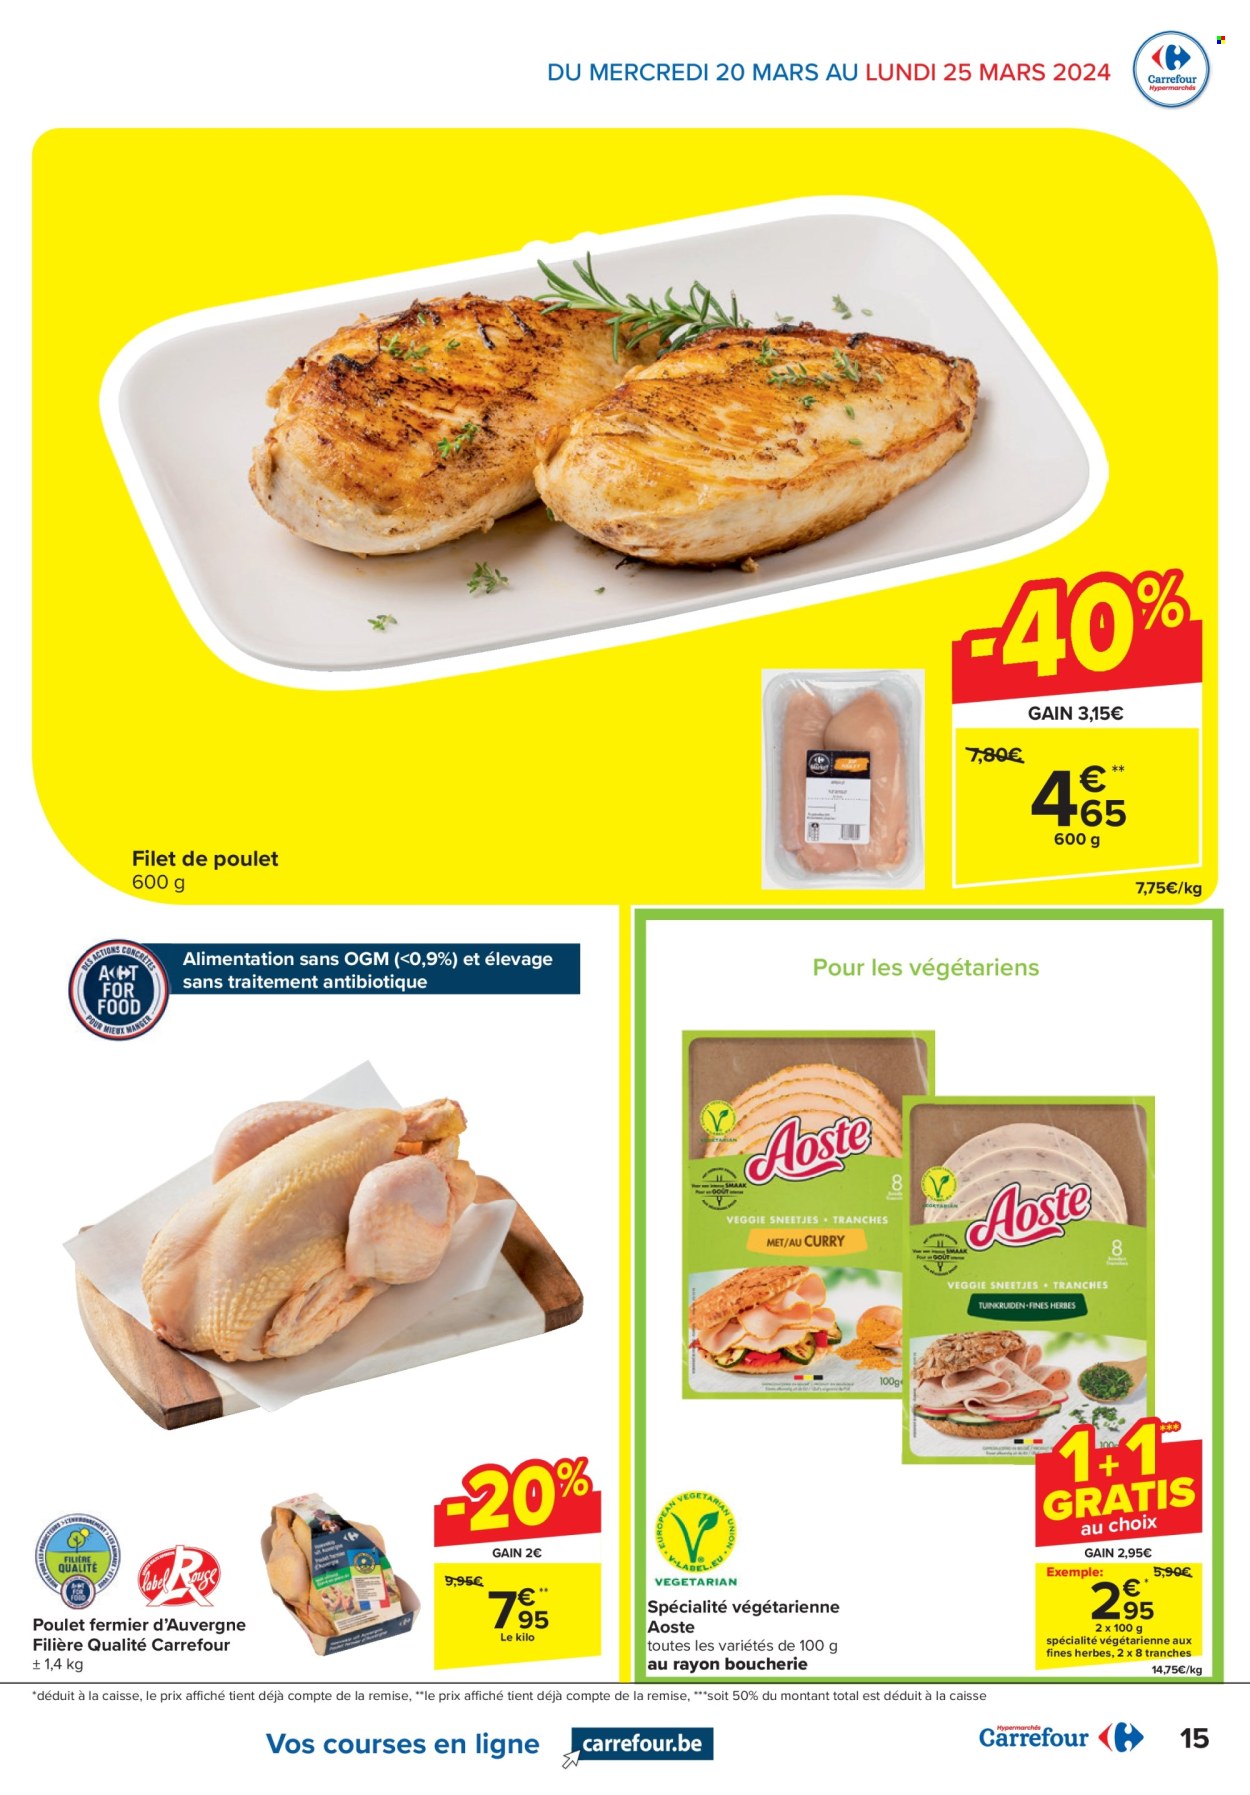 Catalogue Carrefour hypermarkt - 20.3.2024 - 2.4.2024. Page 15.